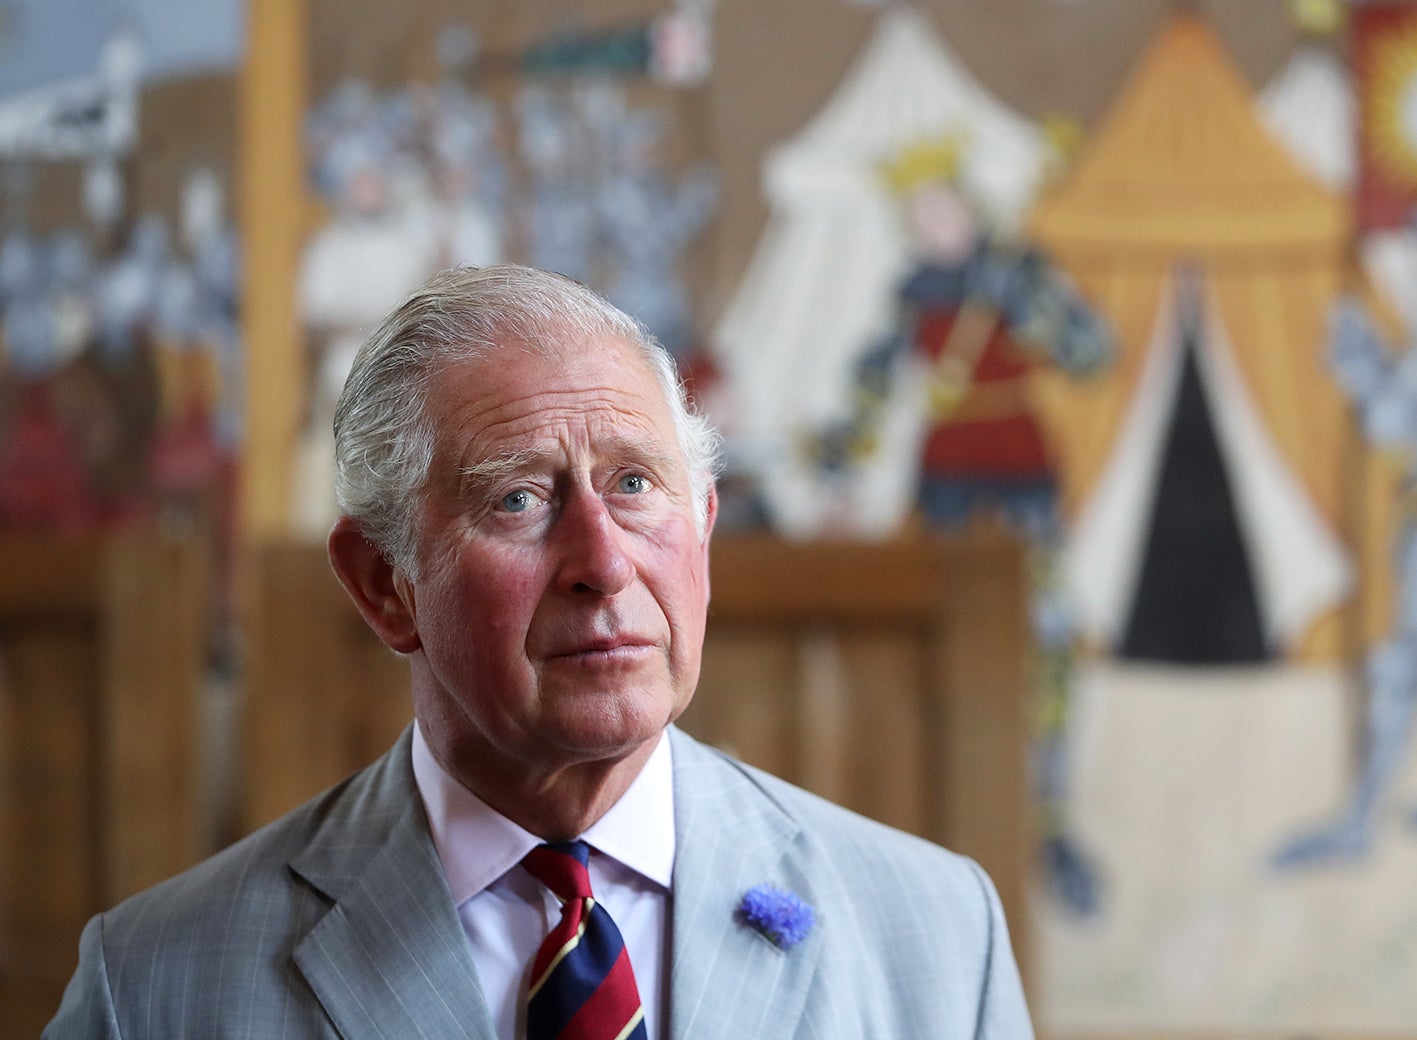 The interventions of Prince Charles will end in calamity – for him and the monarchy